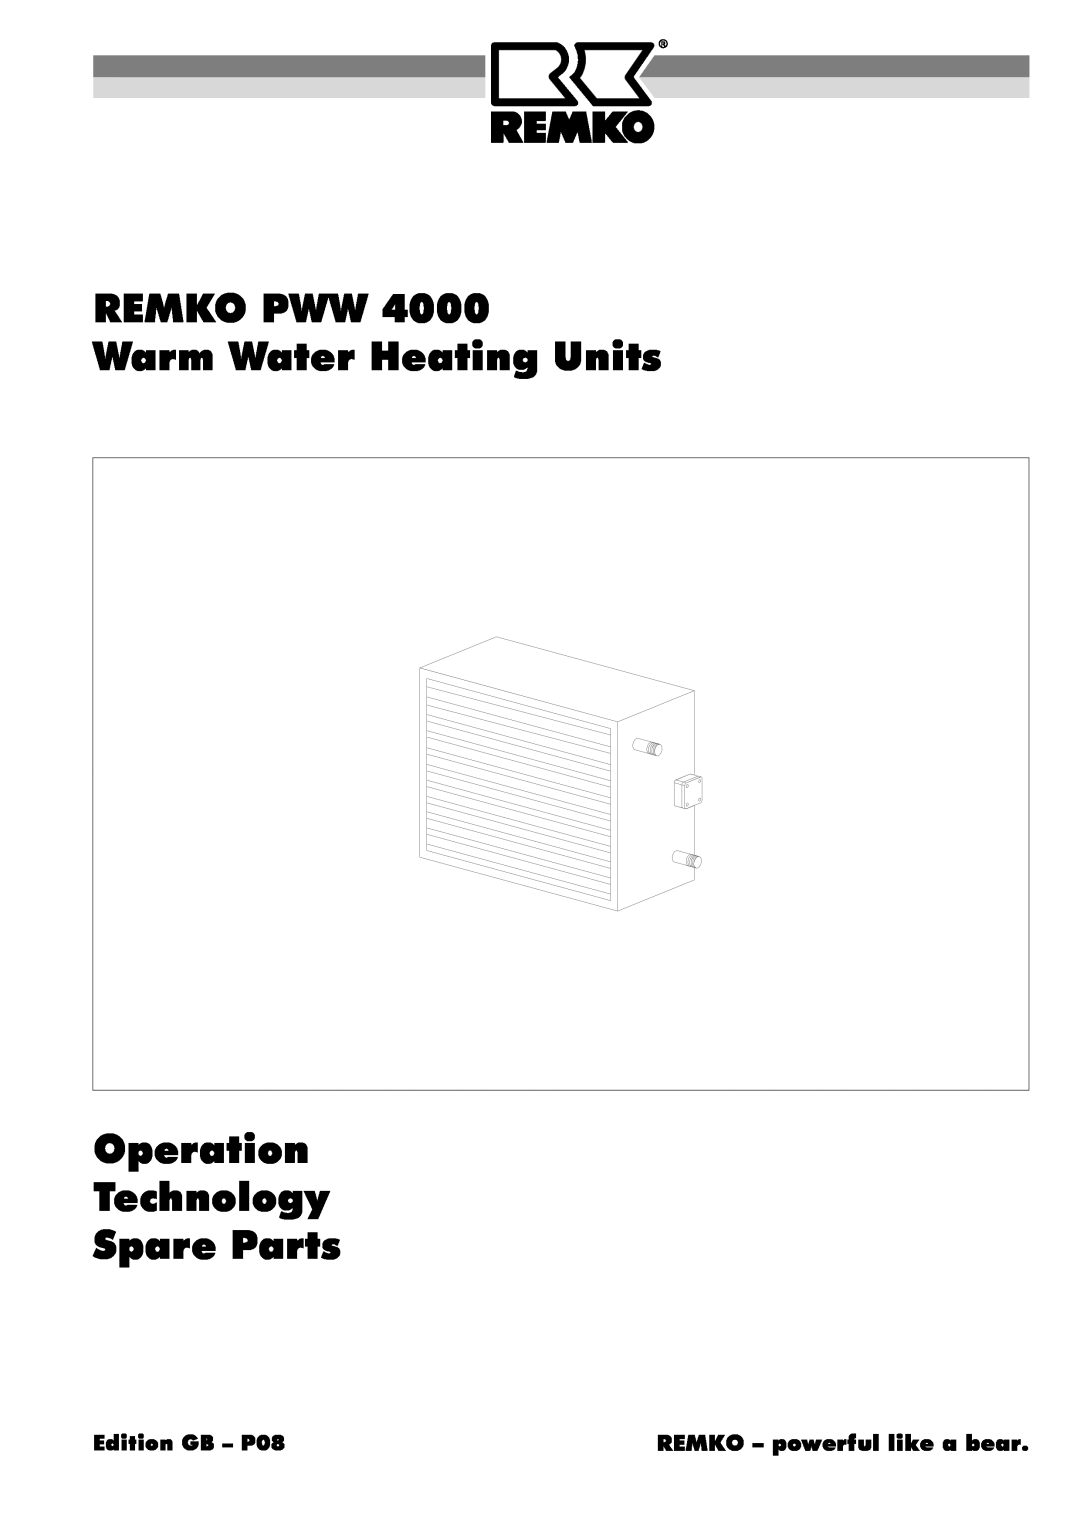 Panasonic PWW 4000 manual Edition GB - P08, REMKO PWW Warm Water Heating Units Operation, Technology Spare Parts 